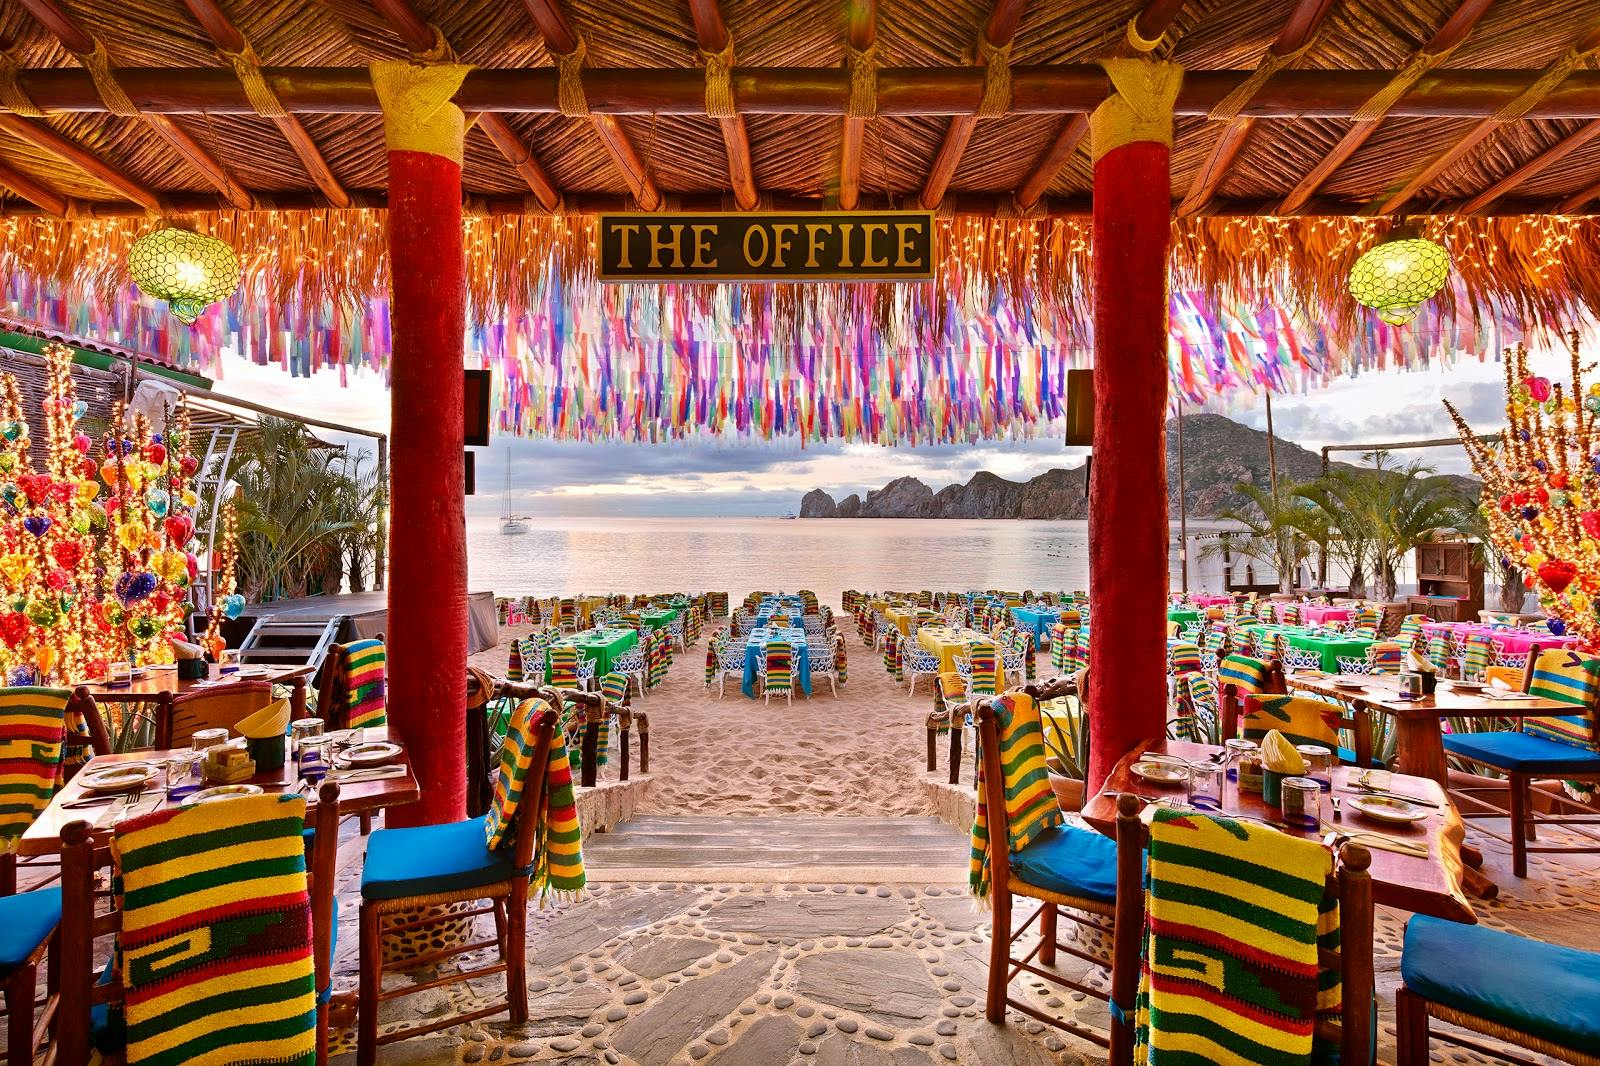 Image - The Office on the Beach